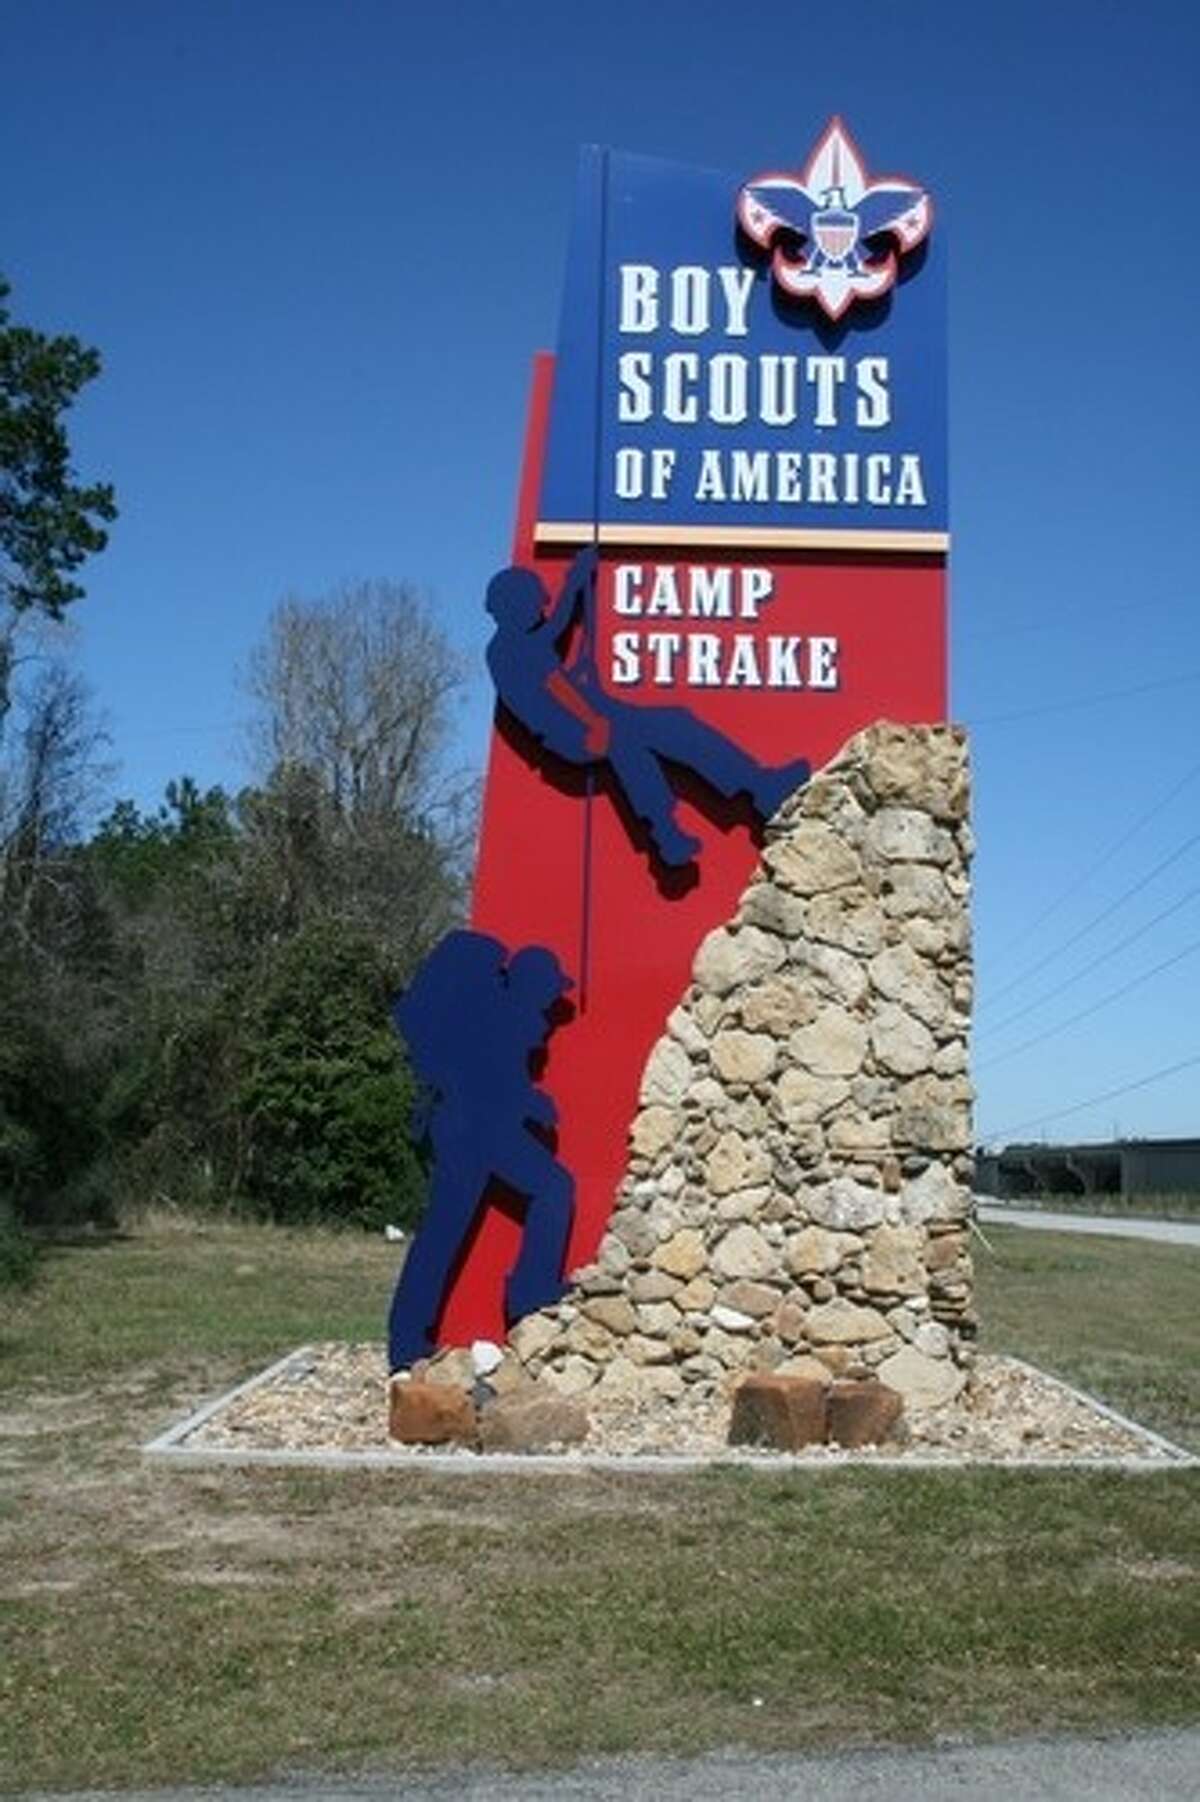 The 2,100-acre Camp Strake, located in Conroe at Interstate 45 and South Loop 336 West, will be on the market after officials with the Boy Scouts of America Sam Houston Area Council announced they want to relocate the camp site.